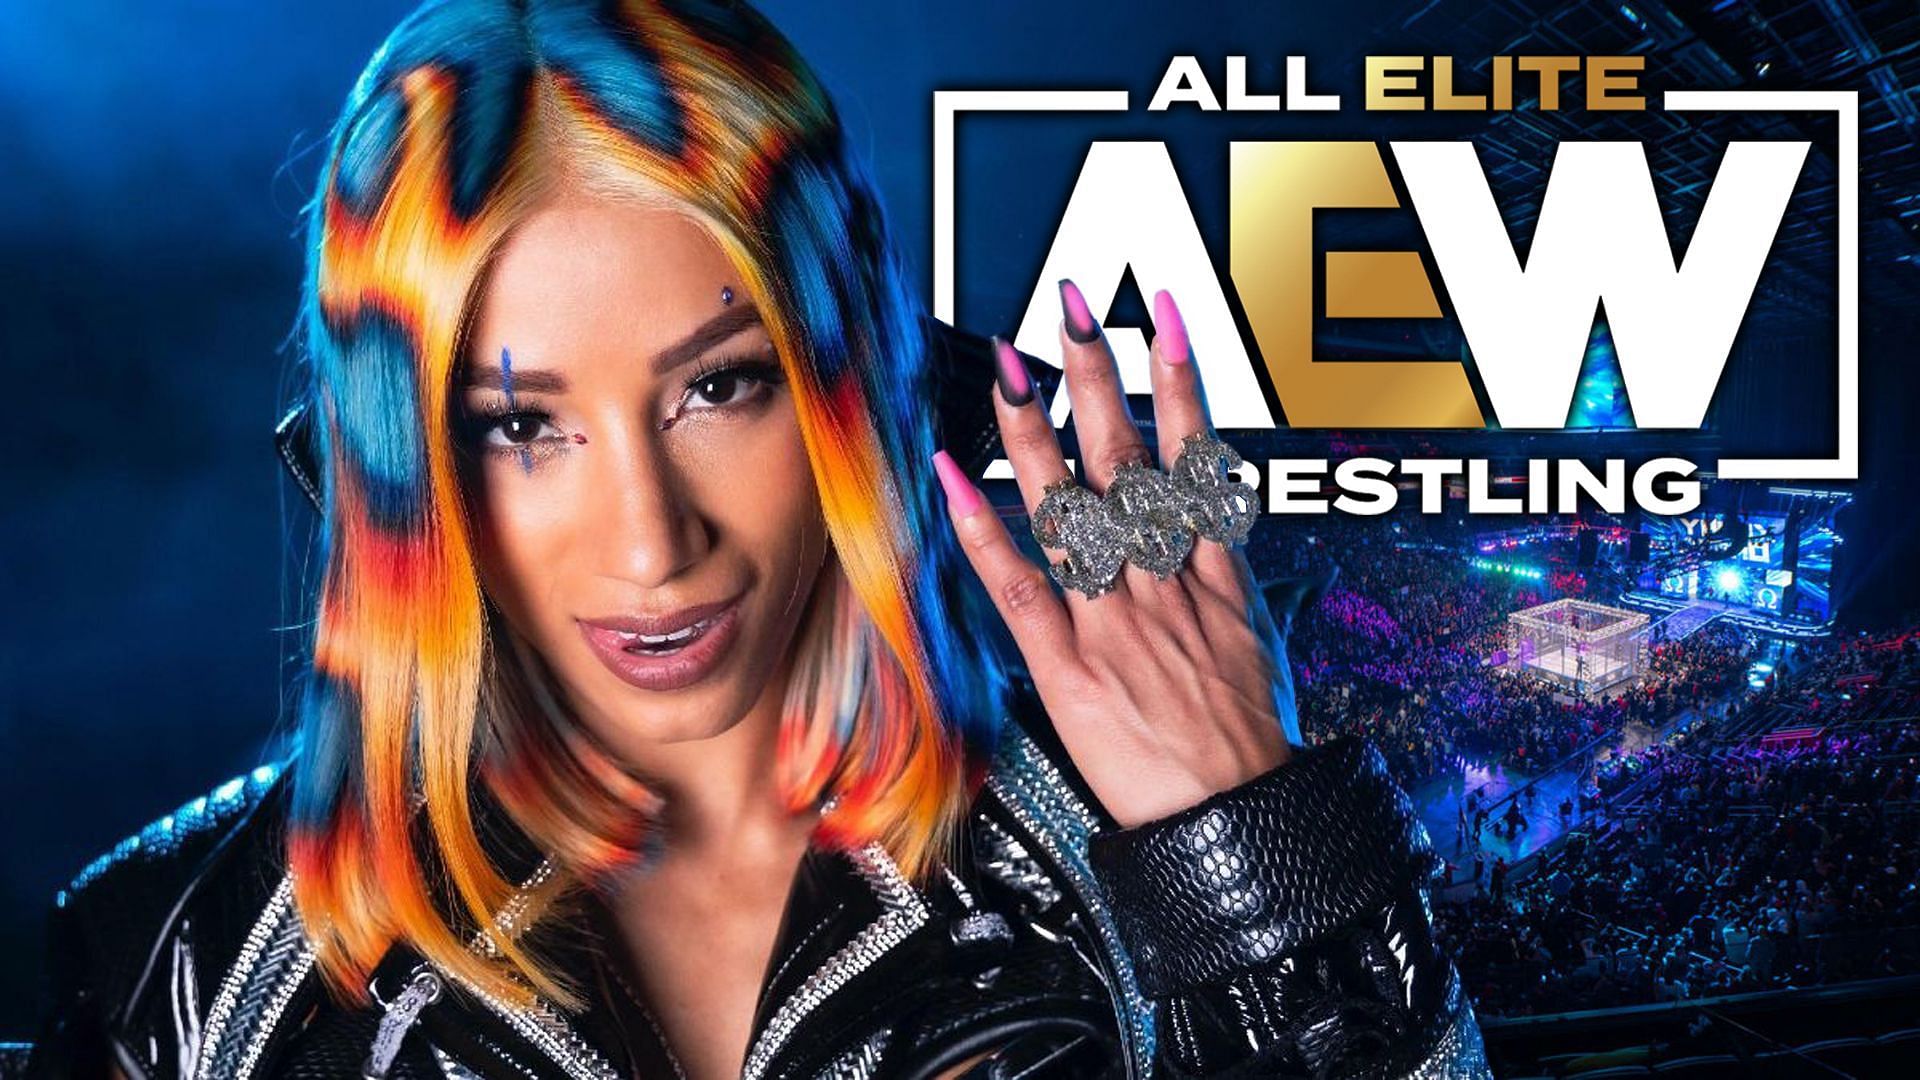 Mercedes Mone was rumored to be in talks with AEW earlier this year